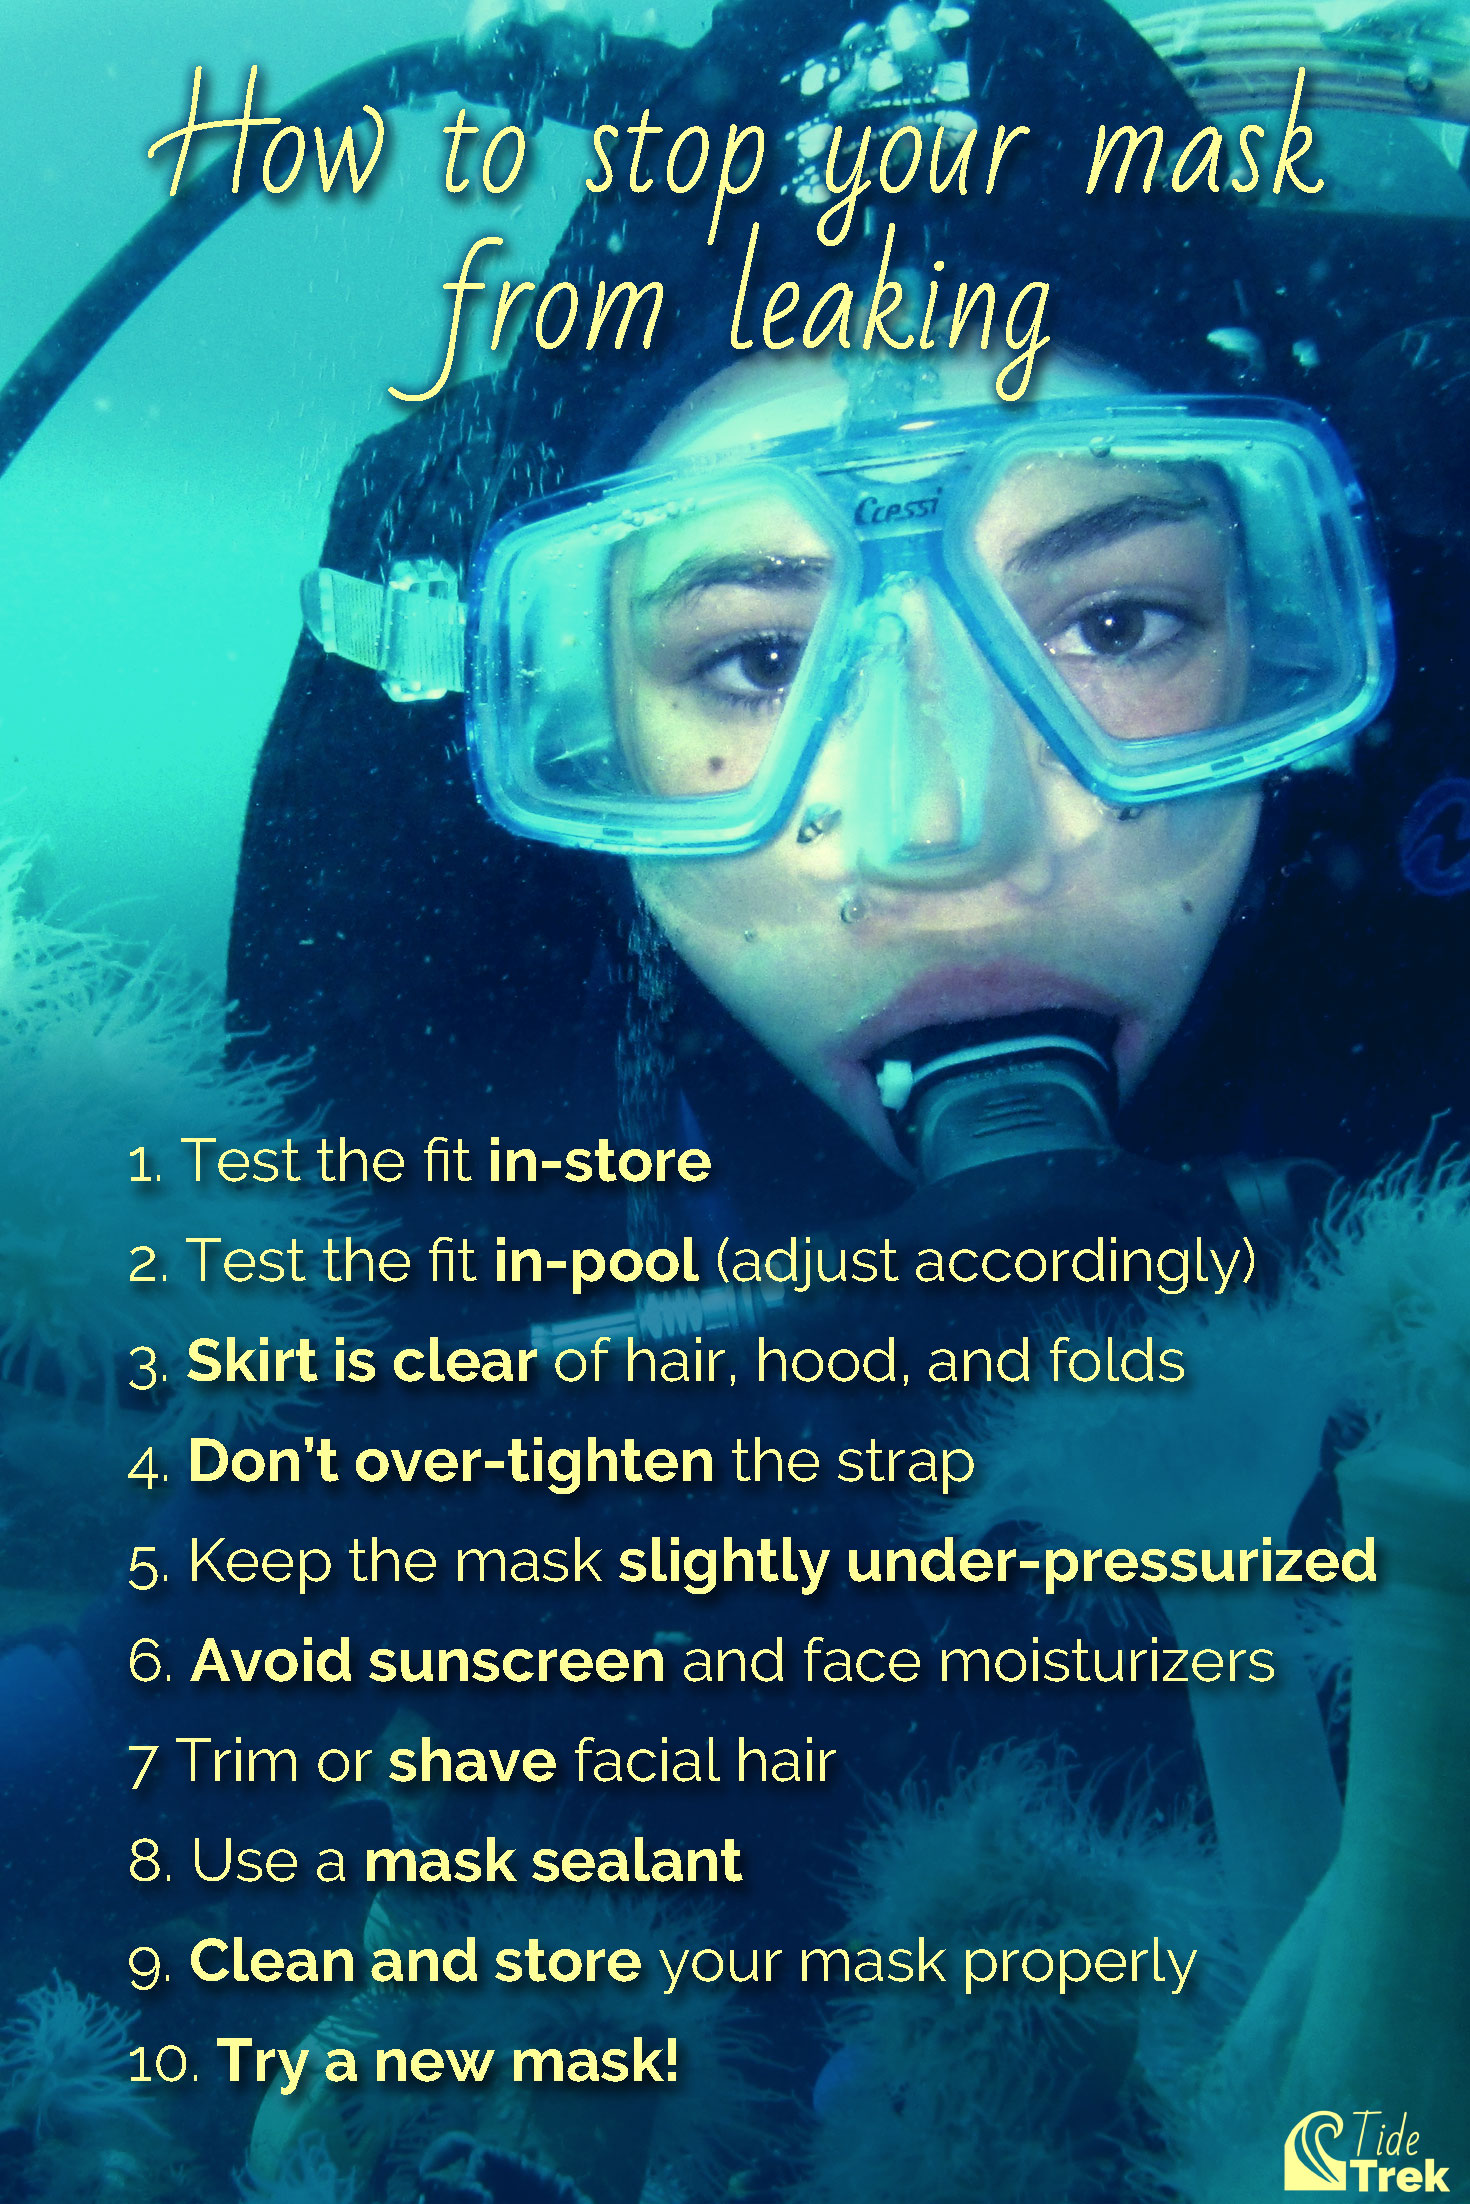 How to stop your dive mask from leaking, 10 troubleshooting steps